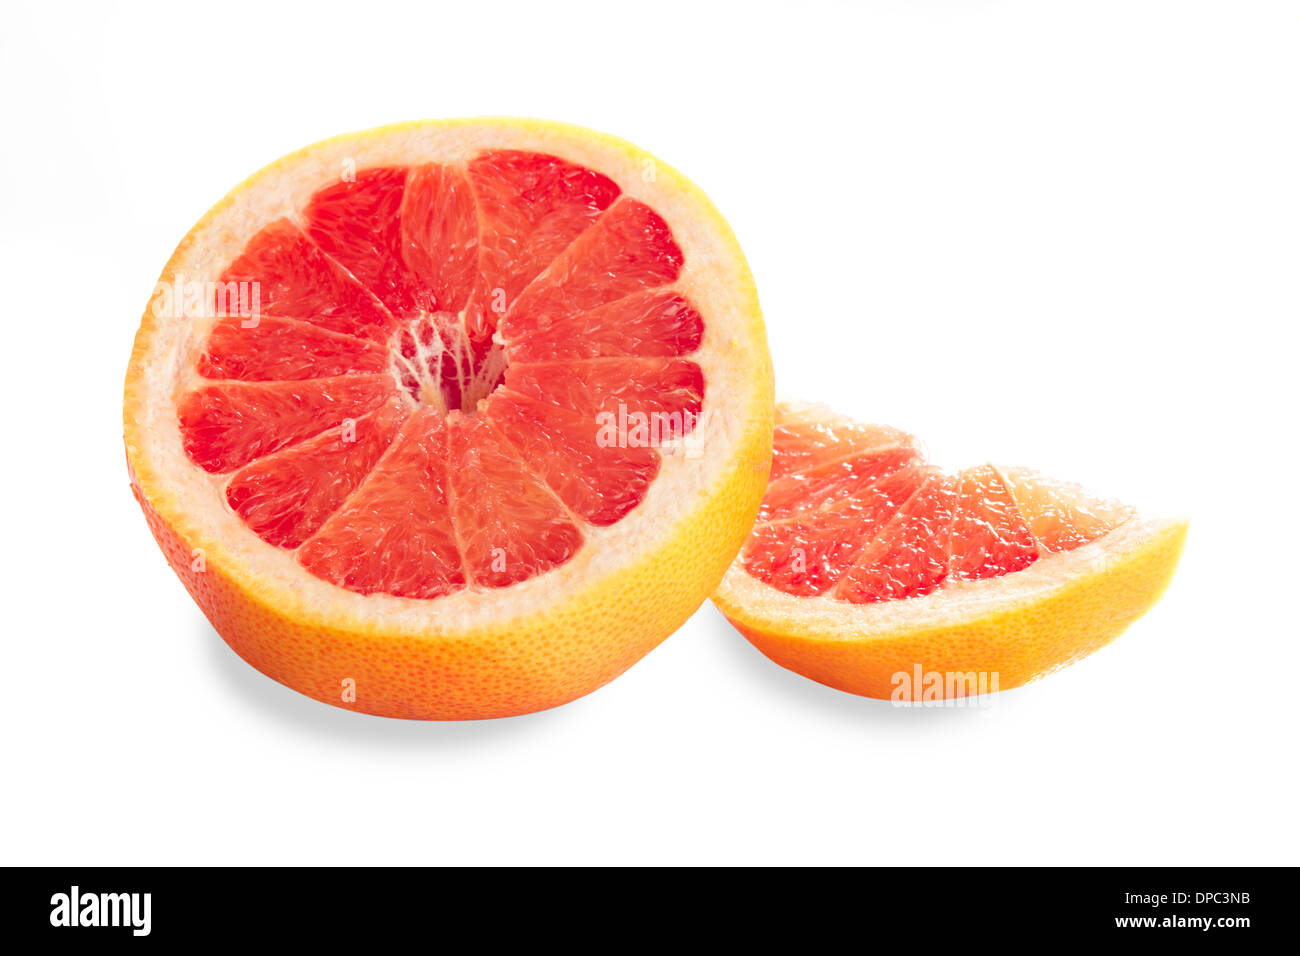 grapefruit's parts isolated on white, prepared for juice Stock Photo